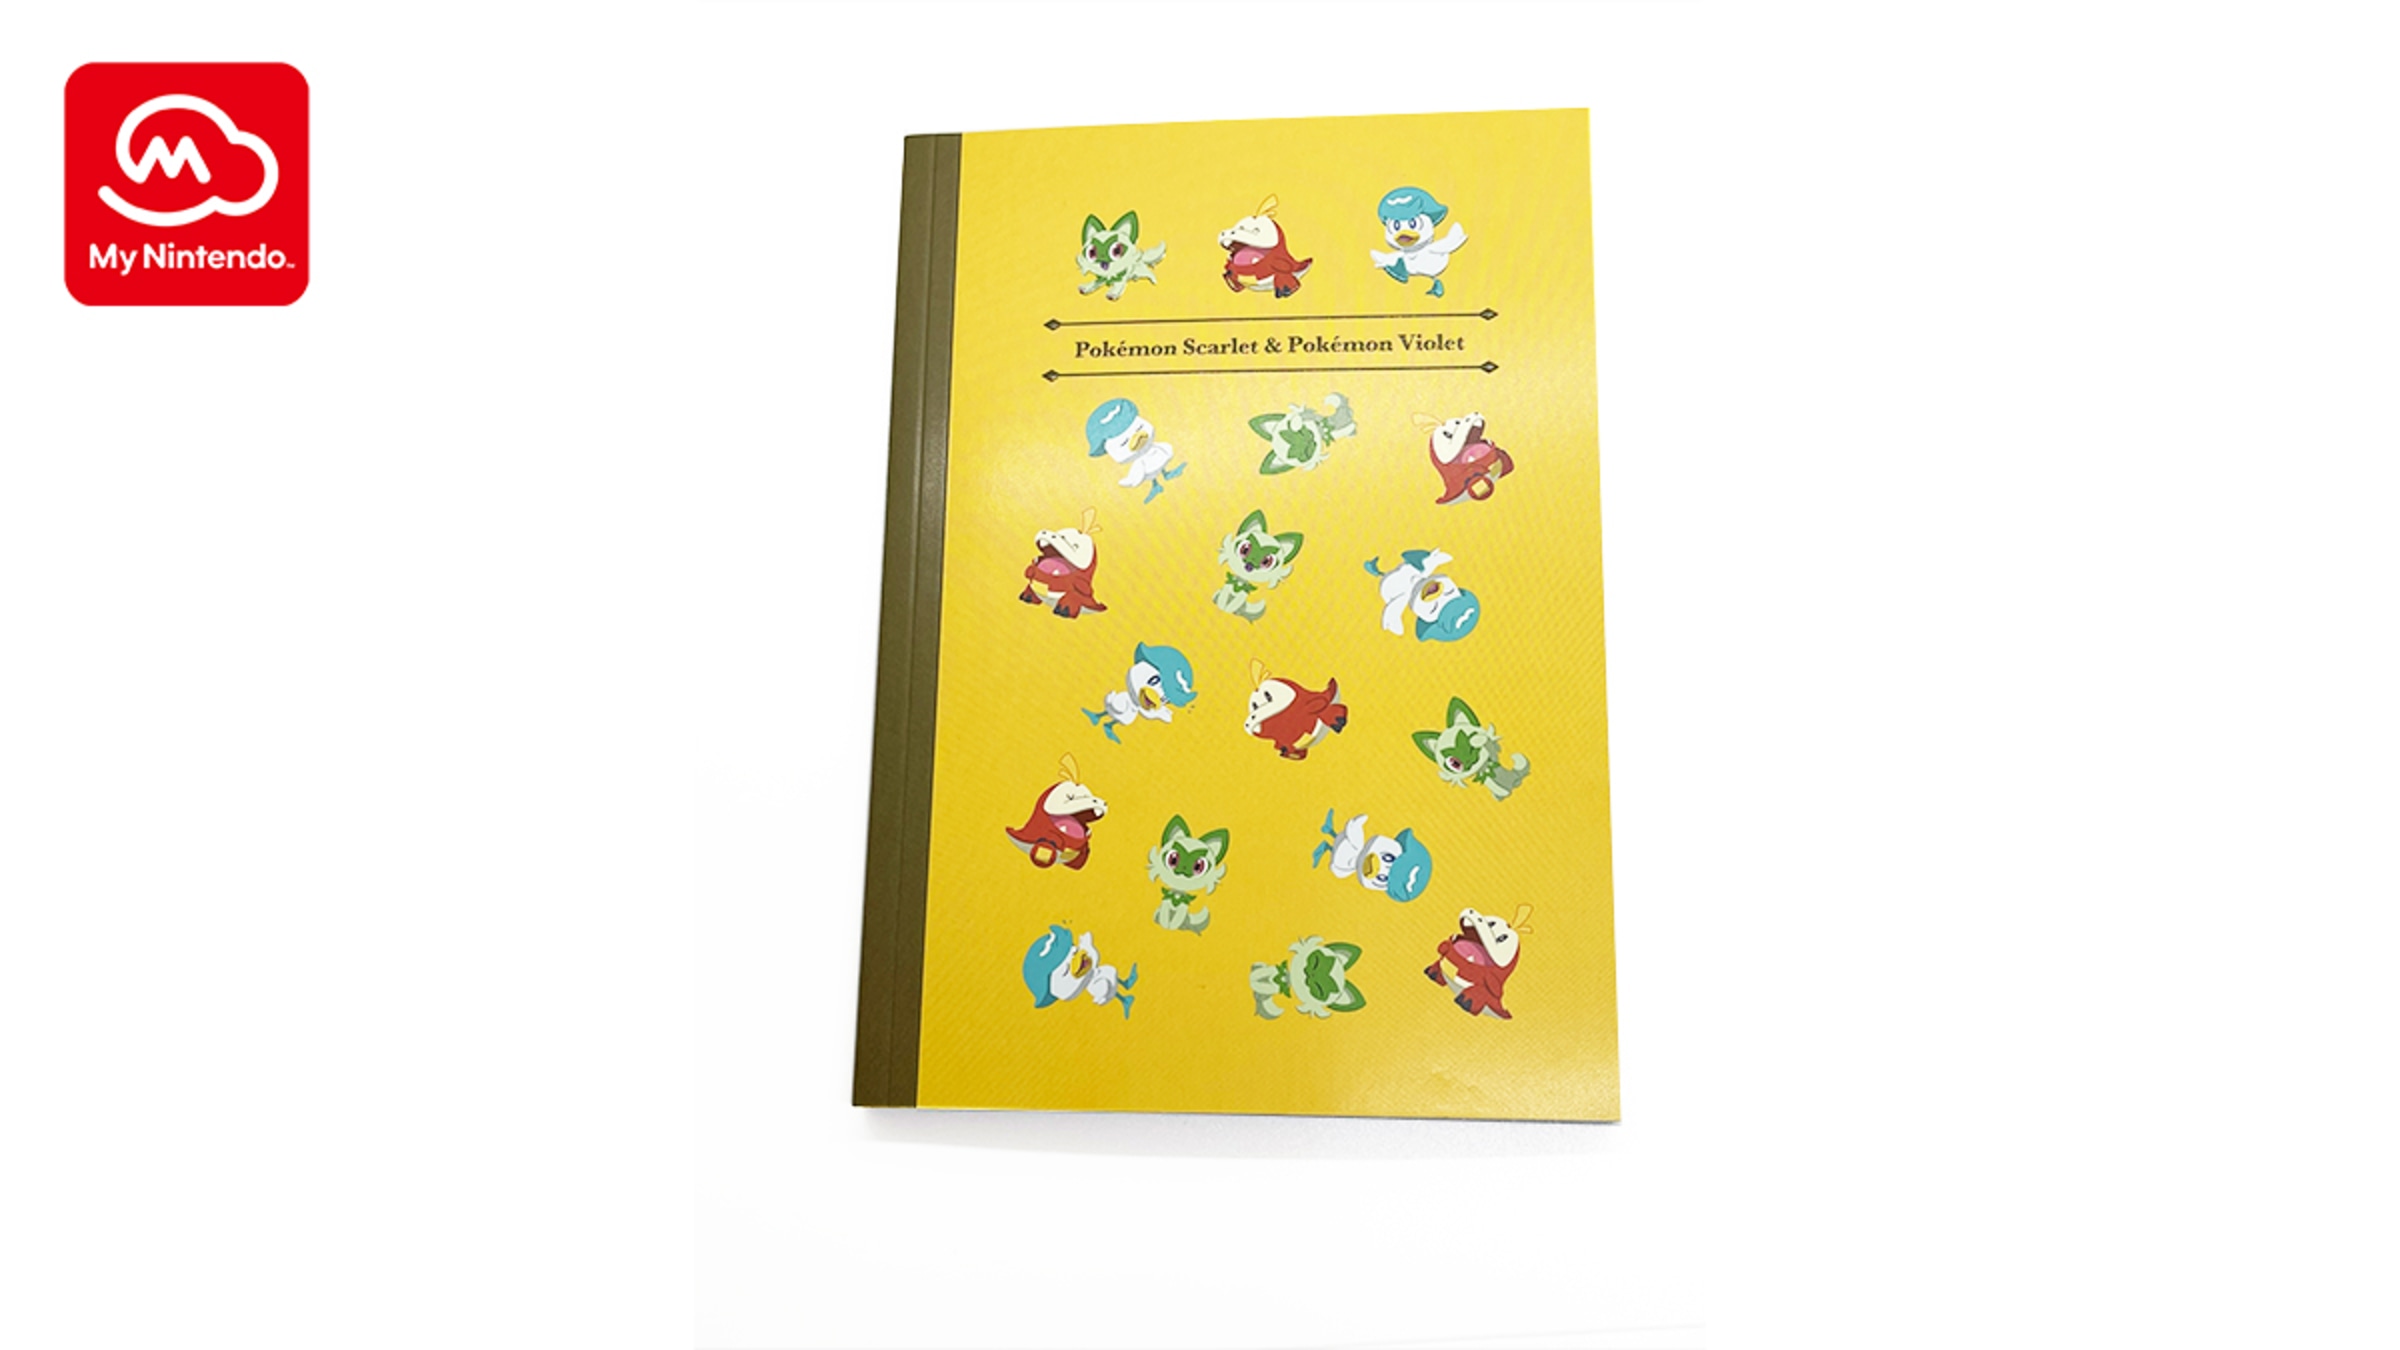 DIY Mini Pokemon notebook with papers